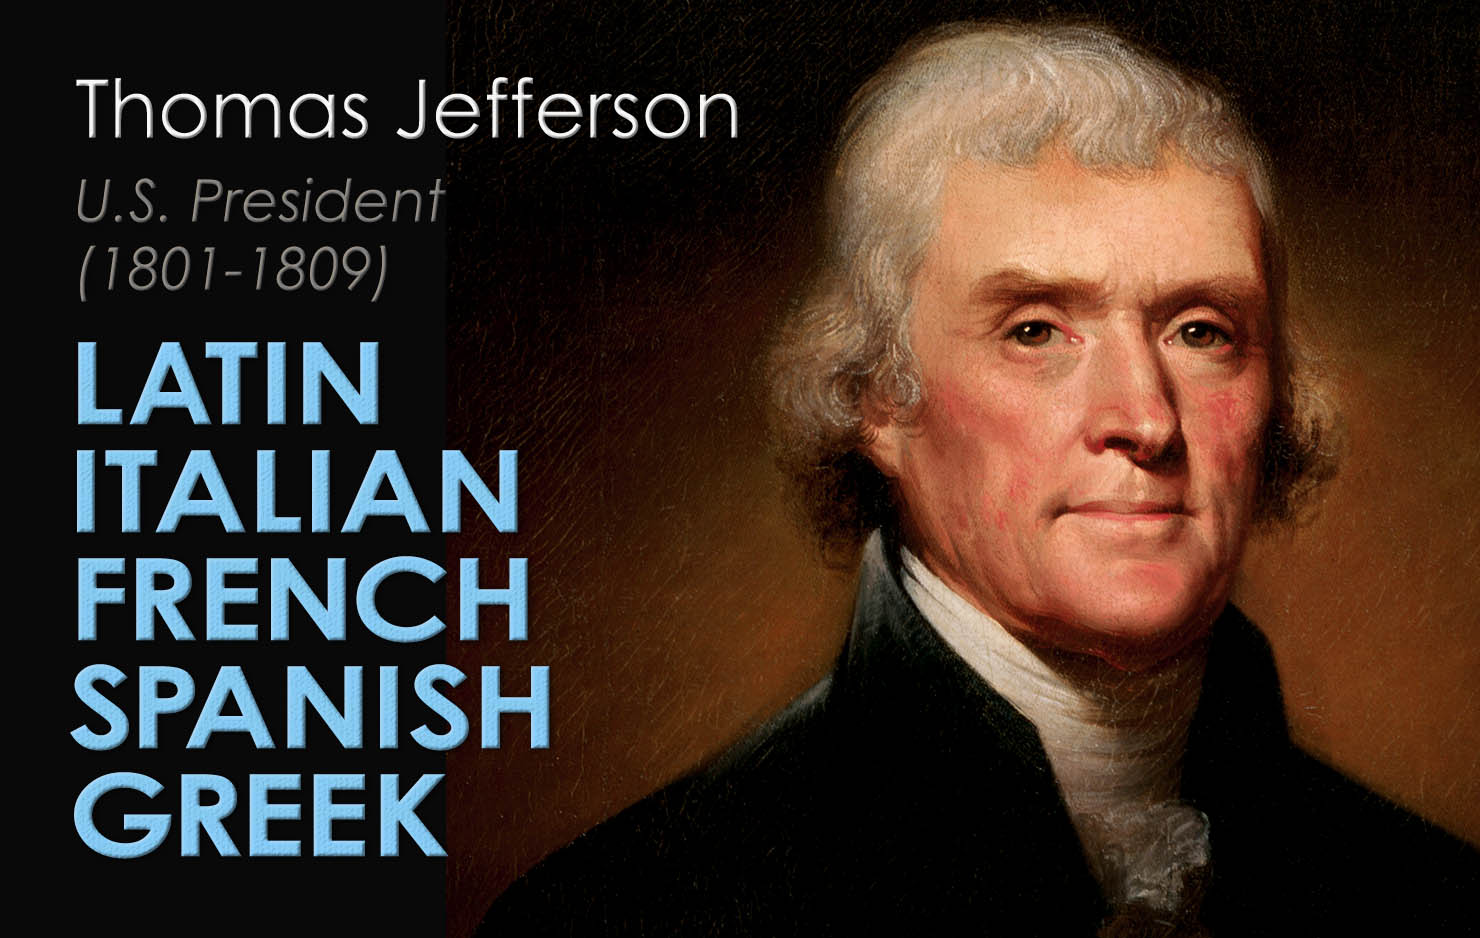 The principal author of the Declaration of Independence and the third president of the United States of America, Thomas Jefferson was fluent in multiple languages including Latin, Italian, French, Spanish and Greek.